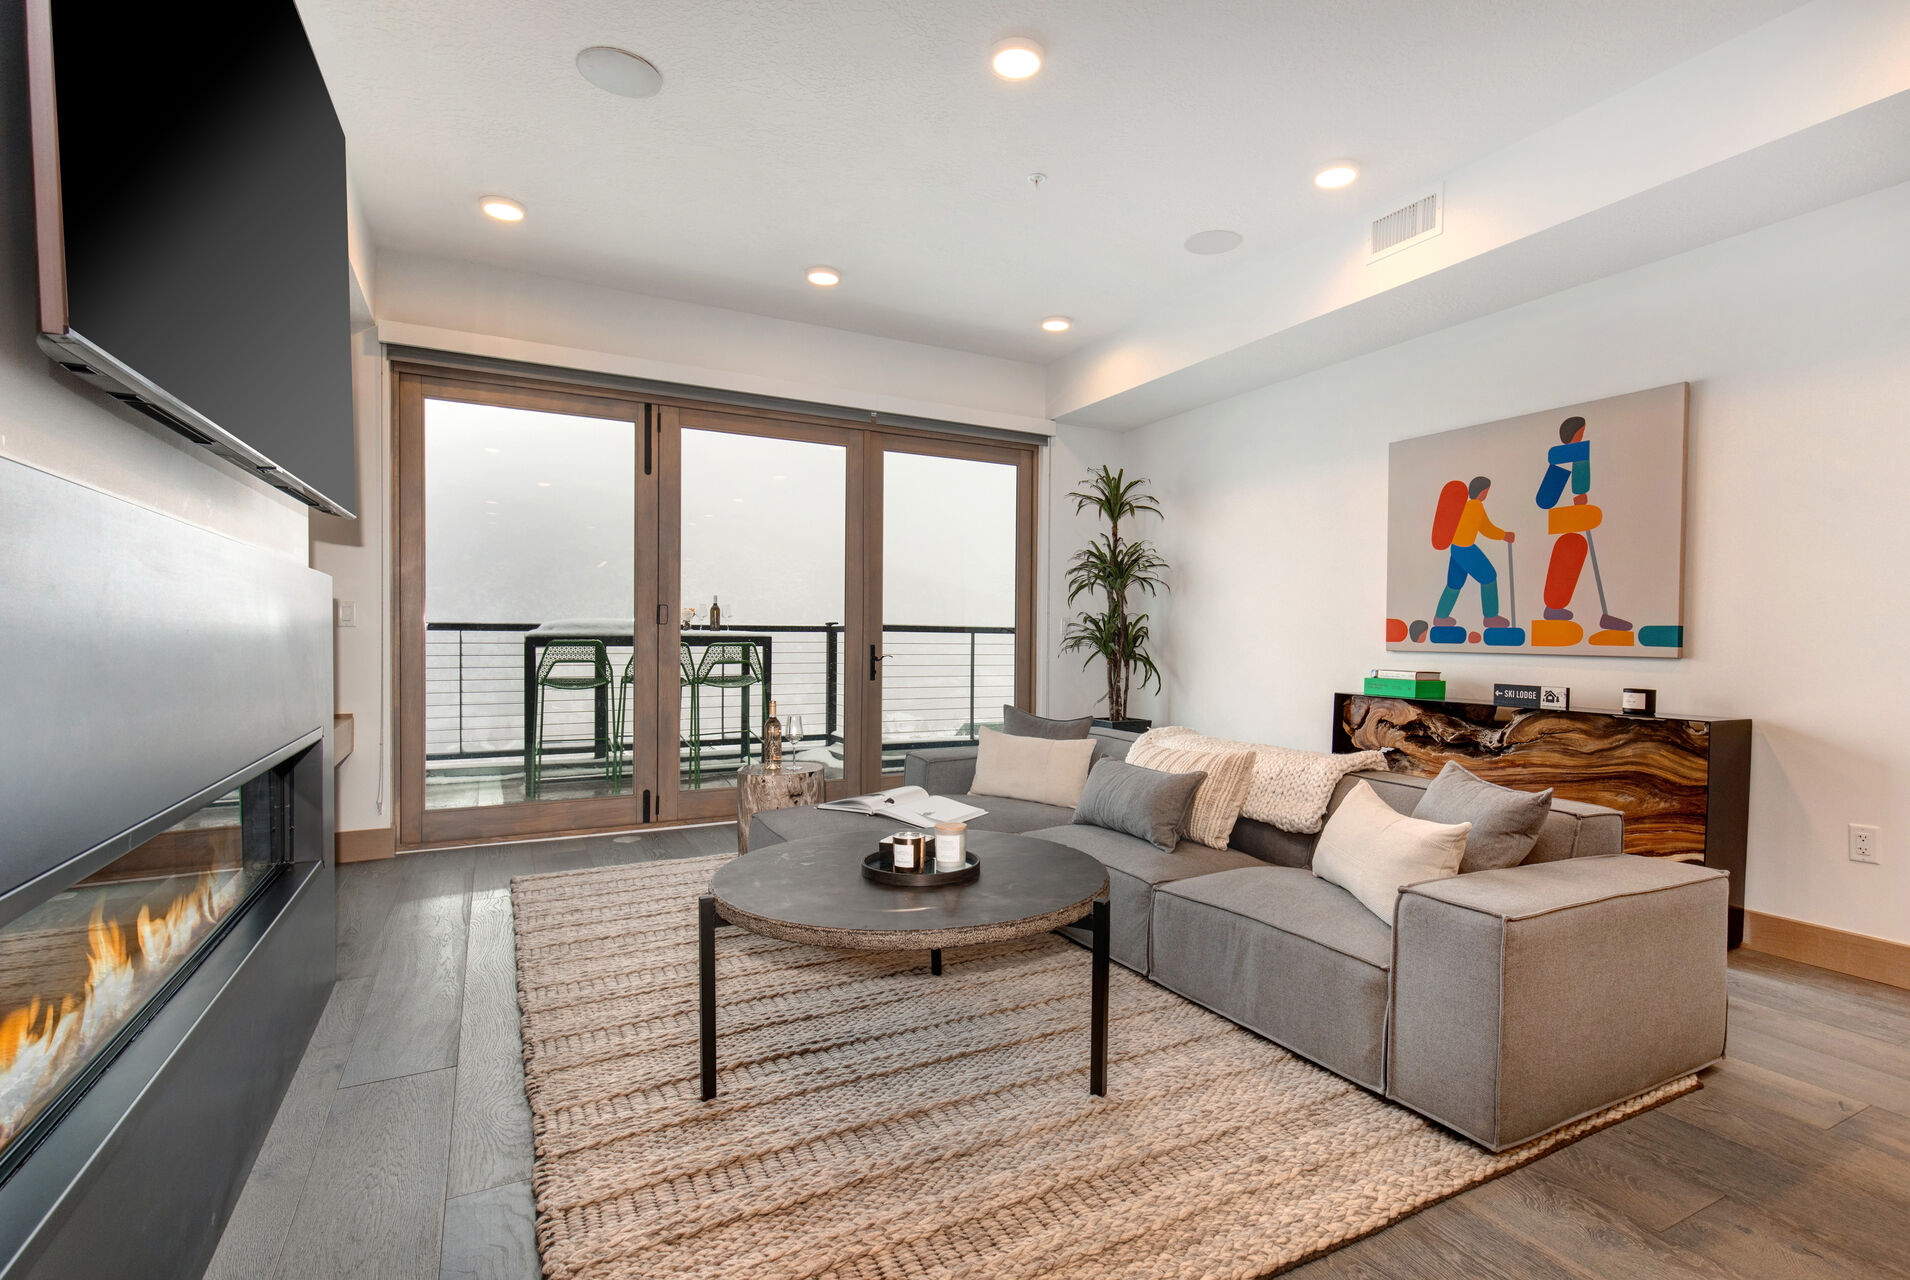 Living Room with sectional, Smart TV, gas fireplace, and private balcony access